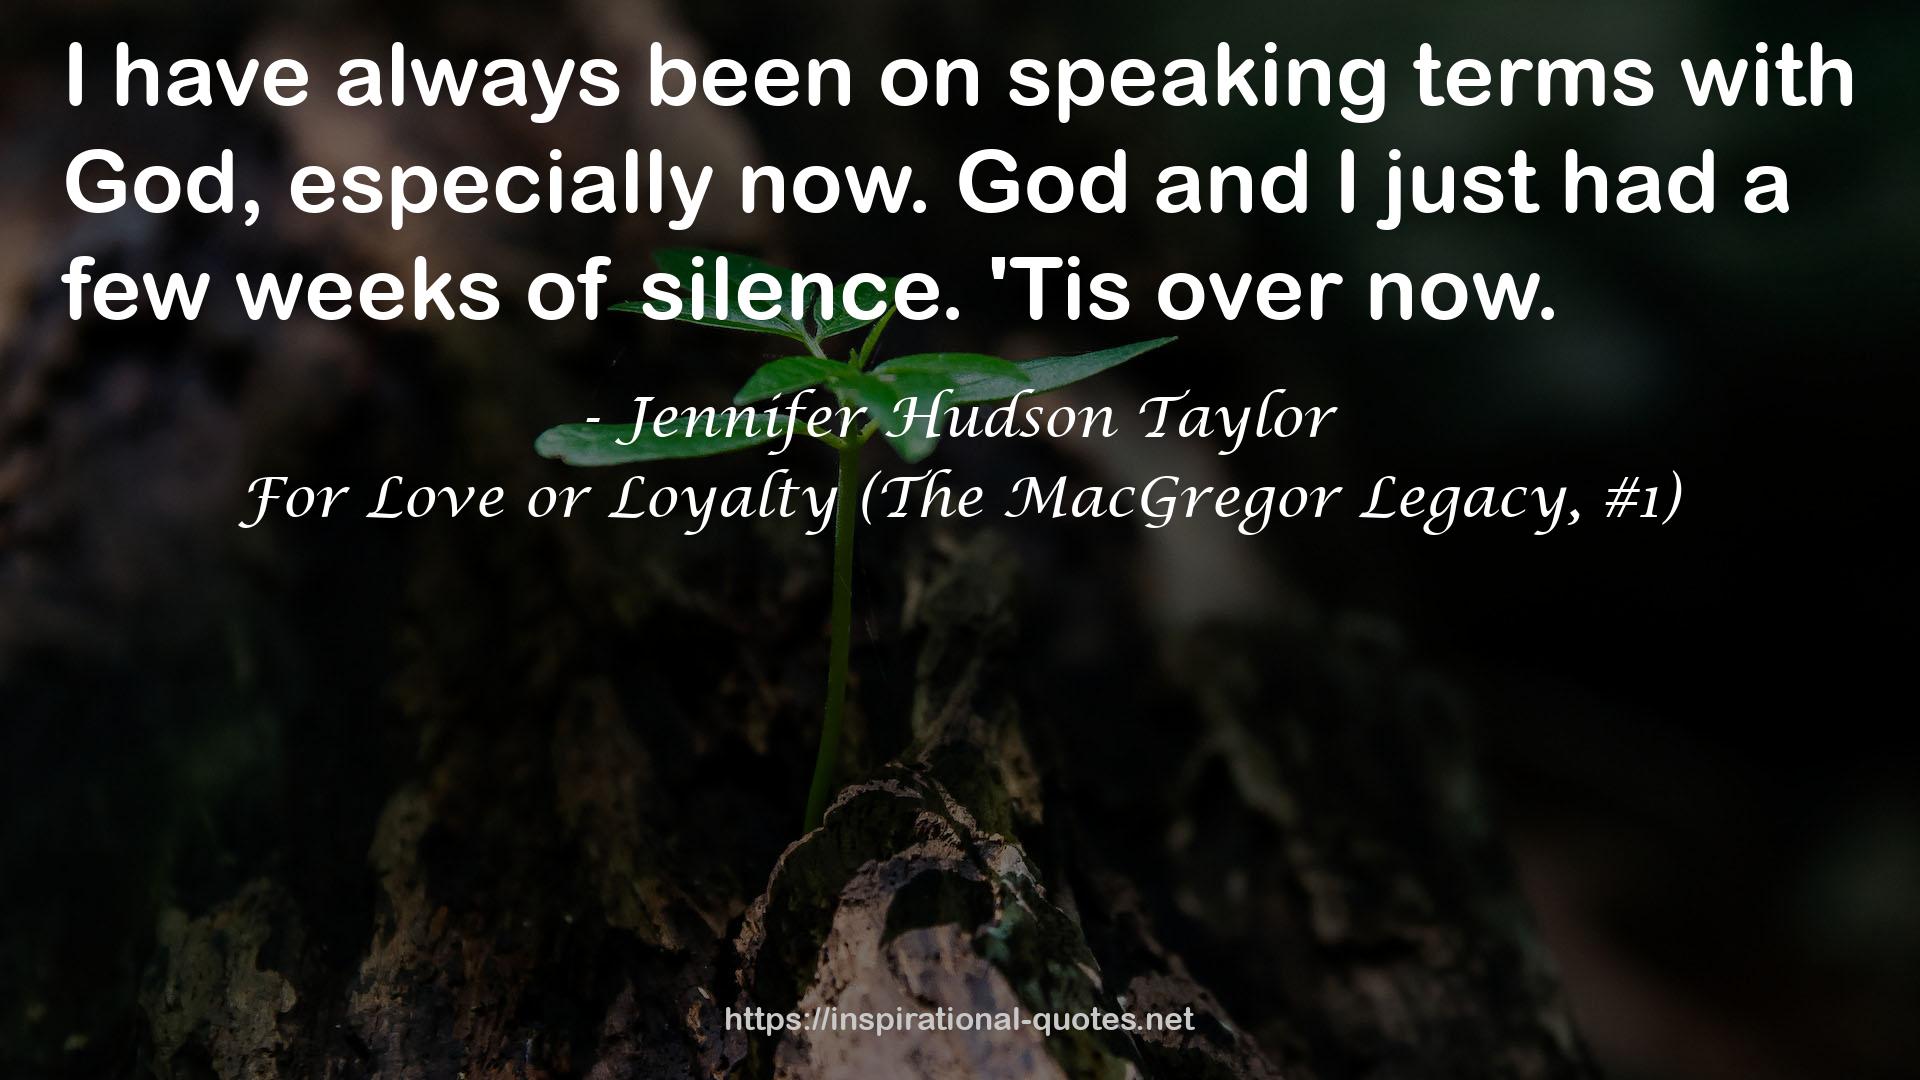 For Love or Loyalty (The MacGregor Legacy, #1) QUOTES